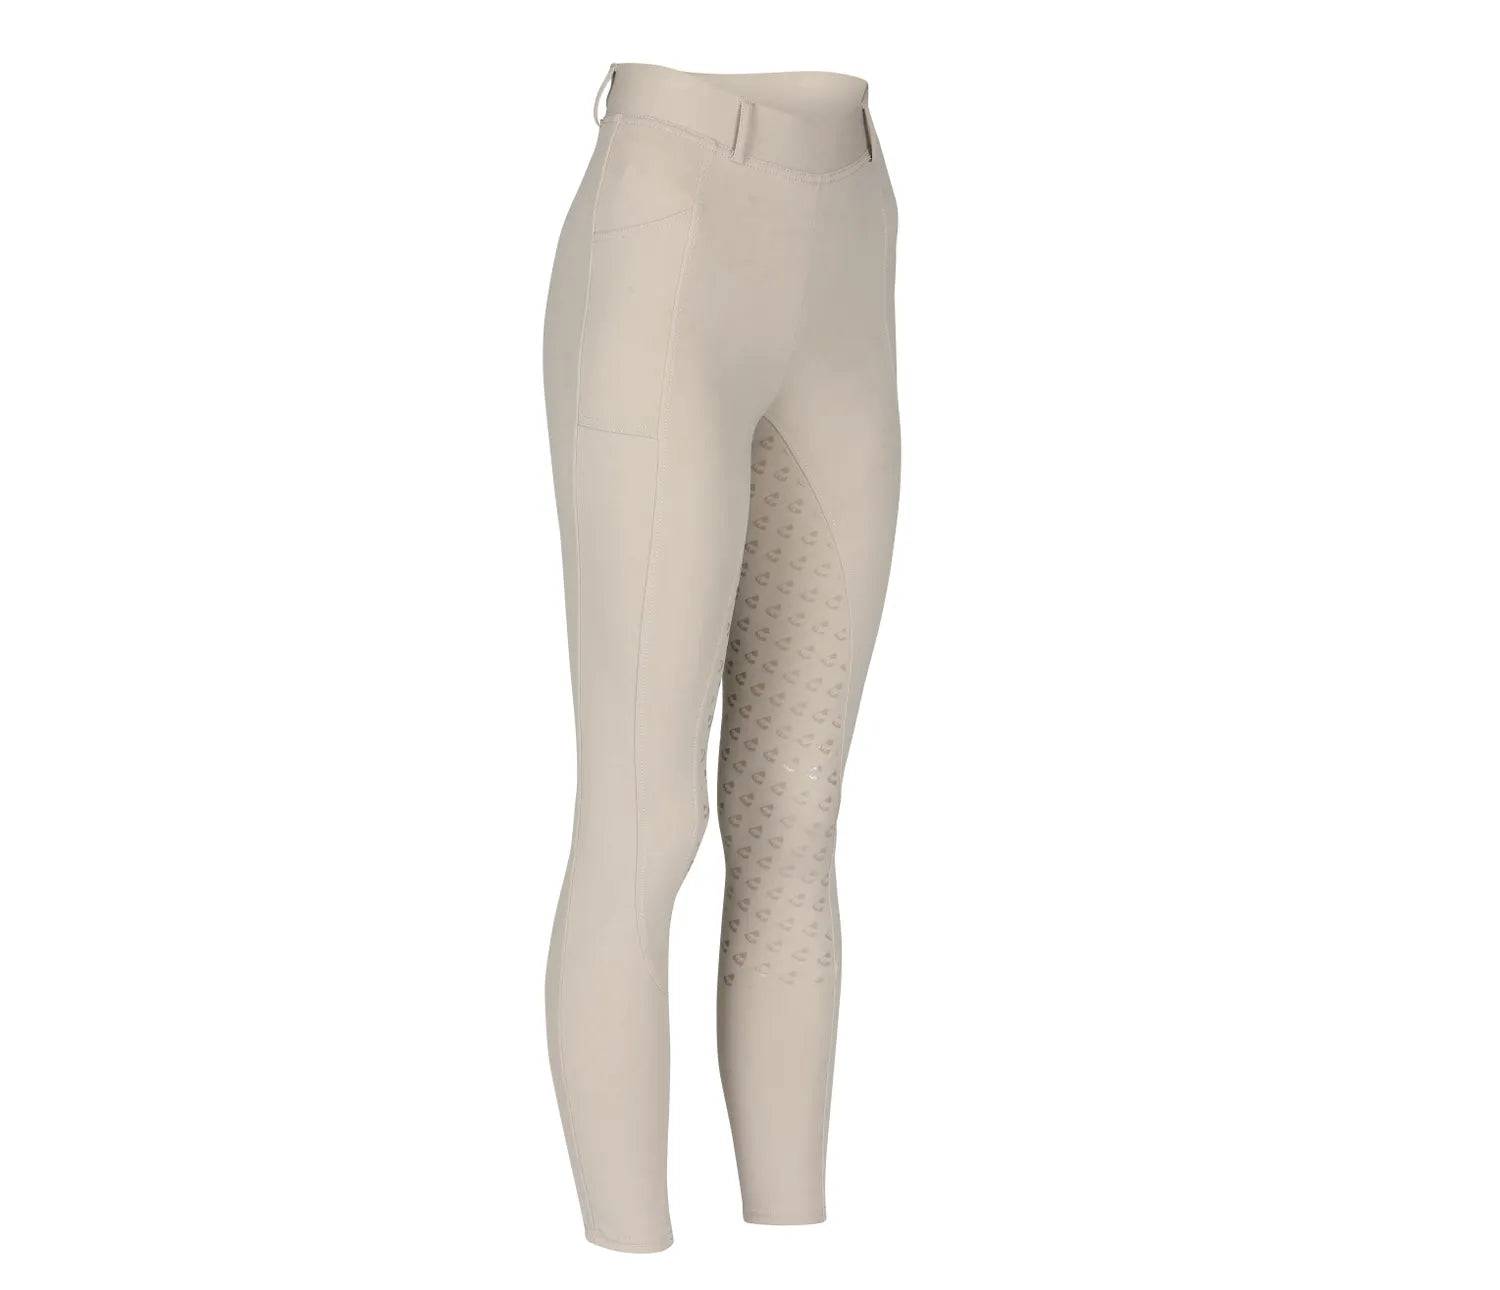 Aubrion Ladies Albany Riding Tights